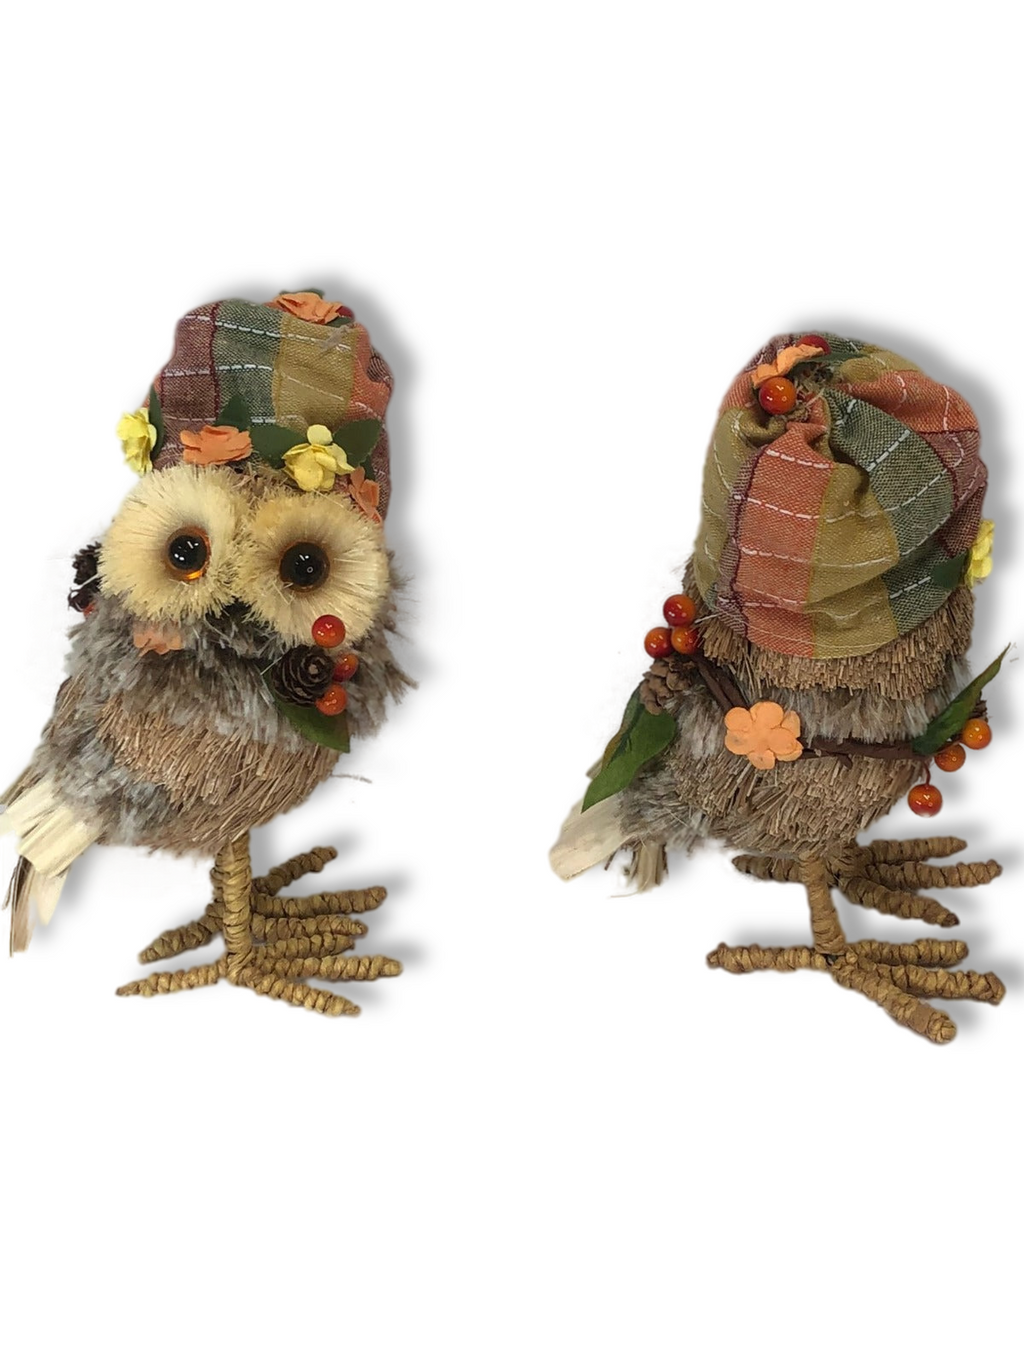 Set of 2 Sisal Harvest Owls with Hats by Valerie